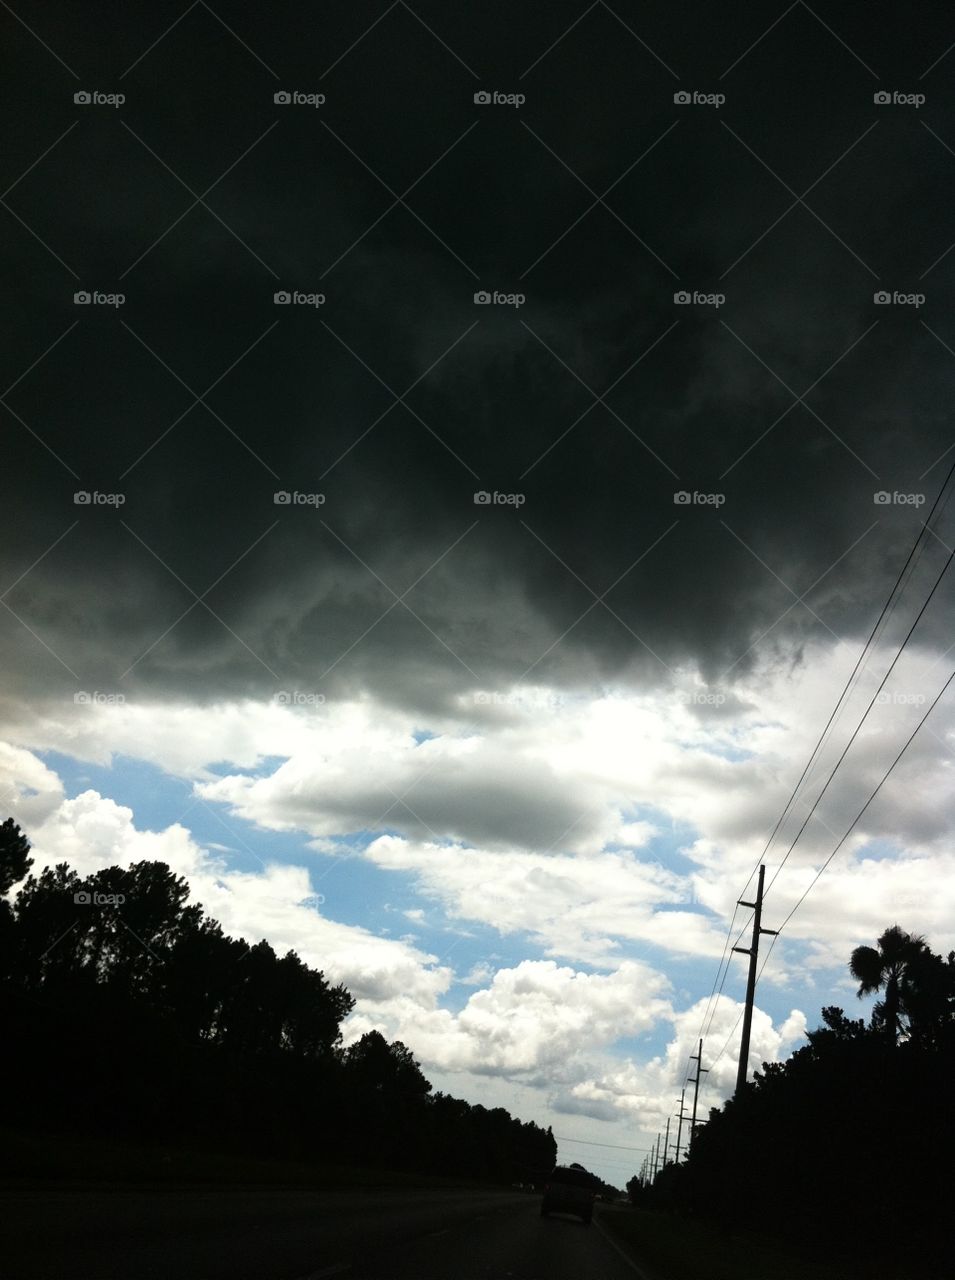 Ominous Clouds. I was riding in my friend's car in Florida when the classic afternoon summer shower chased us down.